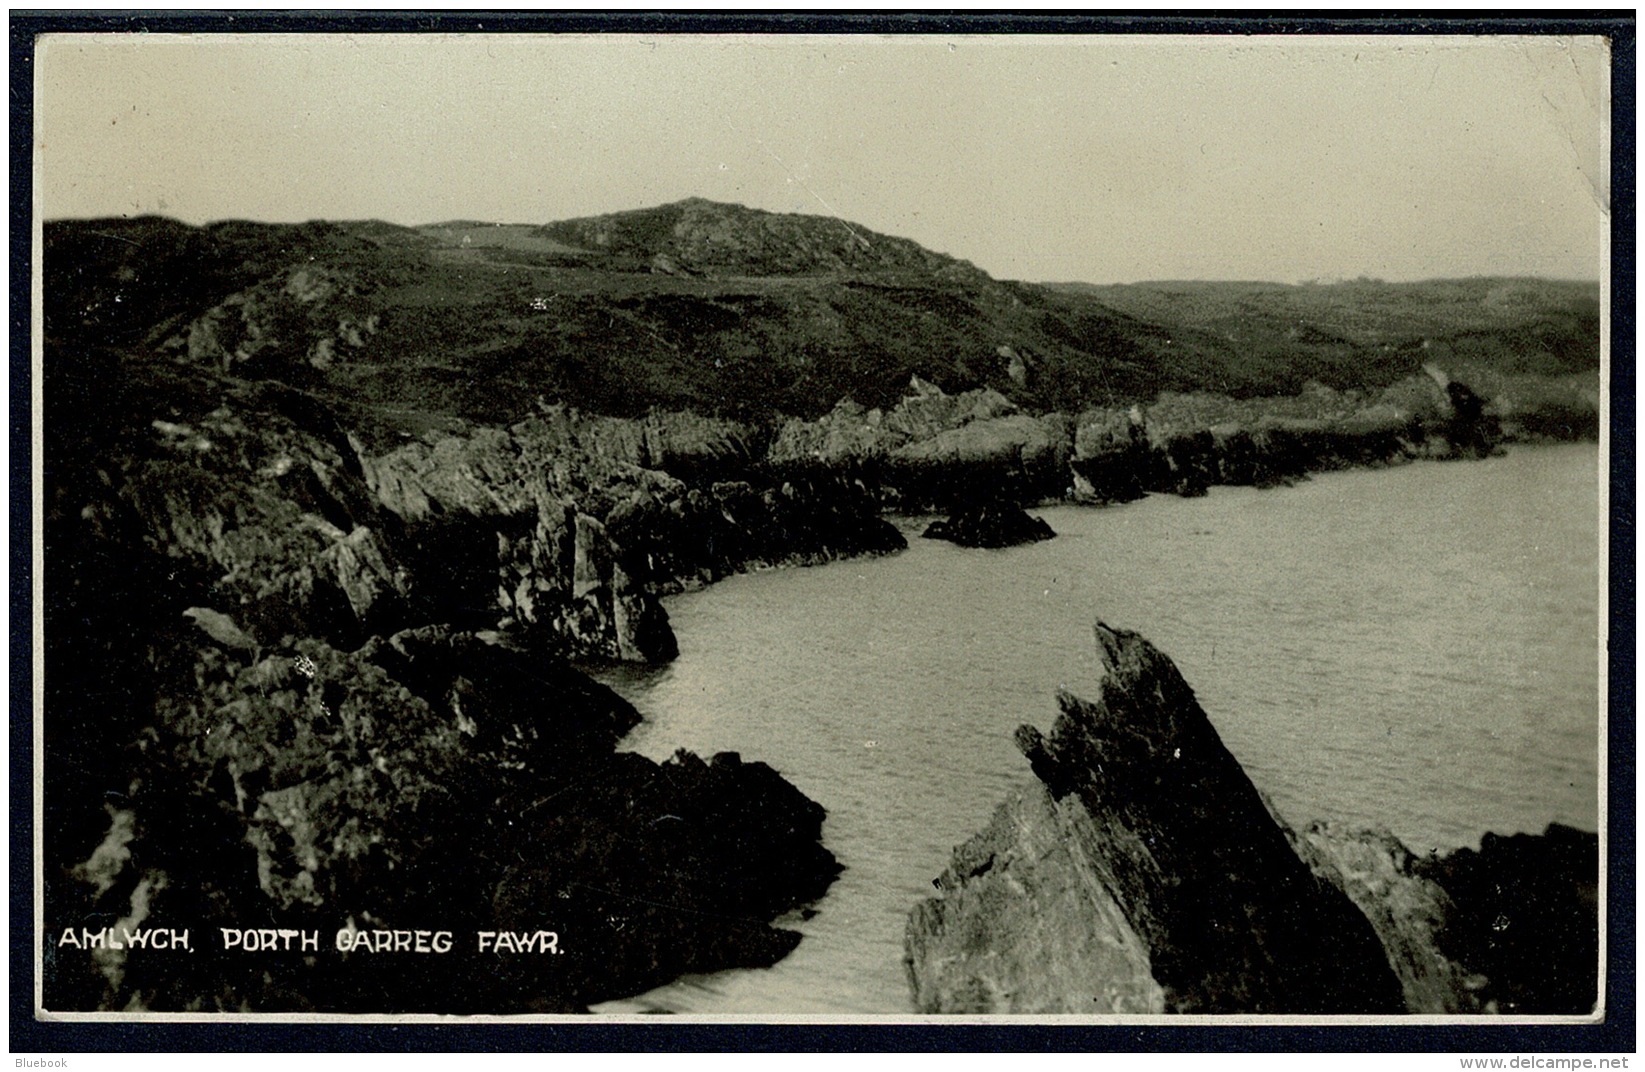 RB 1181 - 1933 Real Photo Postcard - Porth Garreg Fawr Amlwych - Anglesey Wales - Anglesey